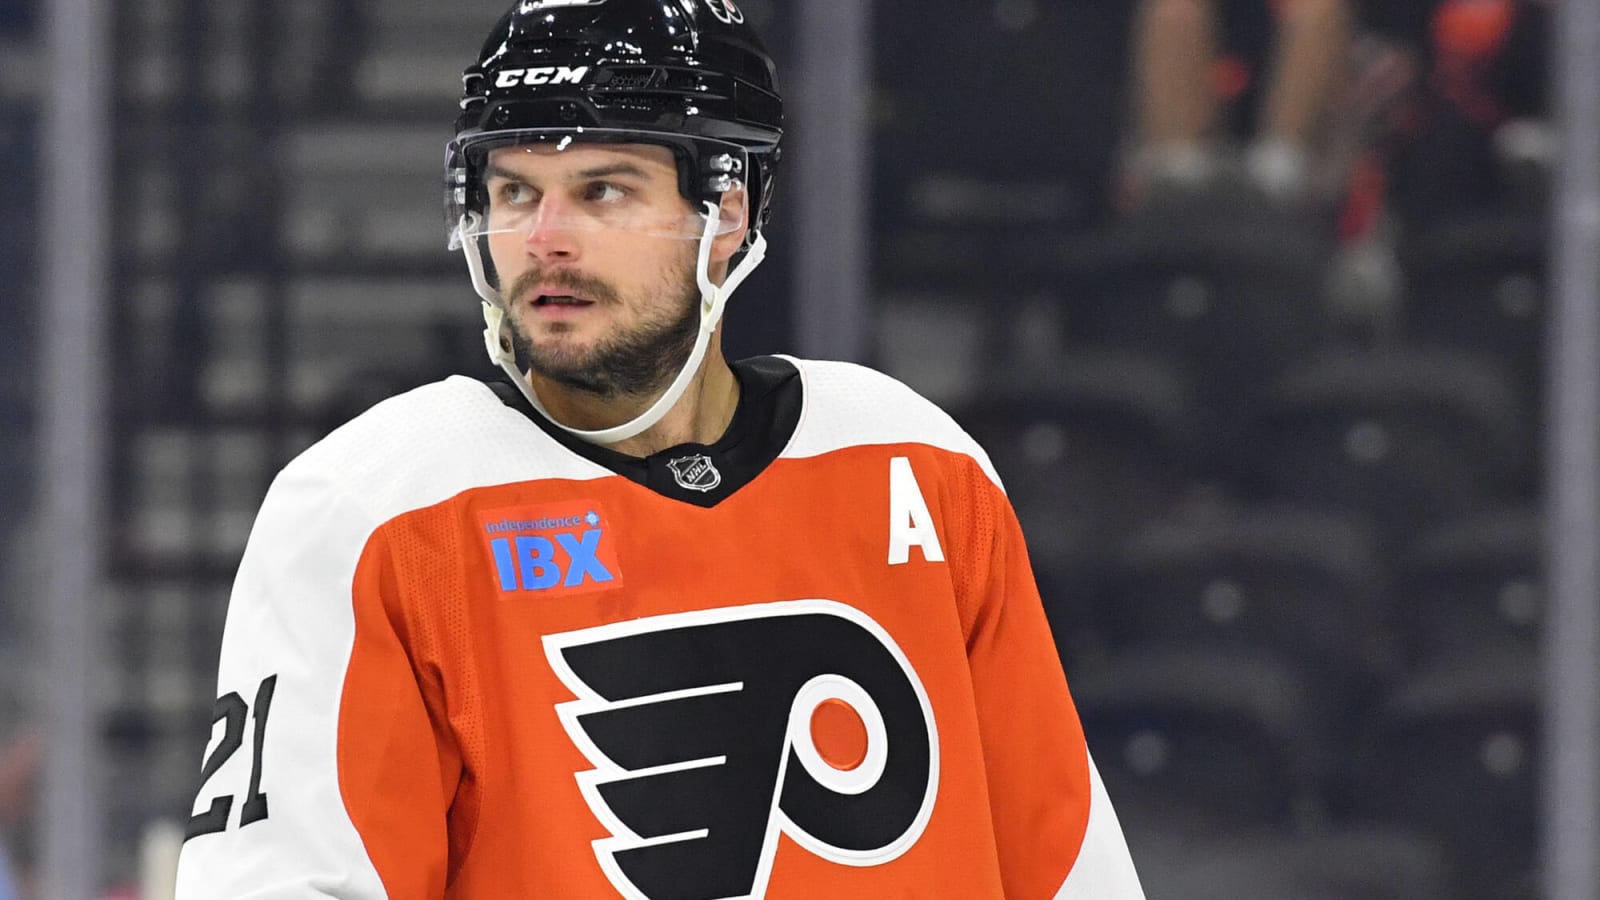 Flyers’ Laughton Takes Stance Against NHL Regarding Pride Tape